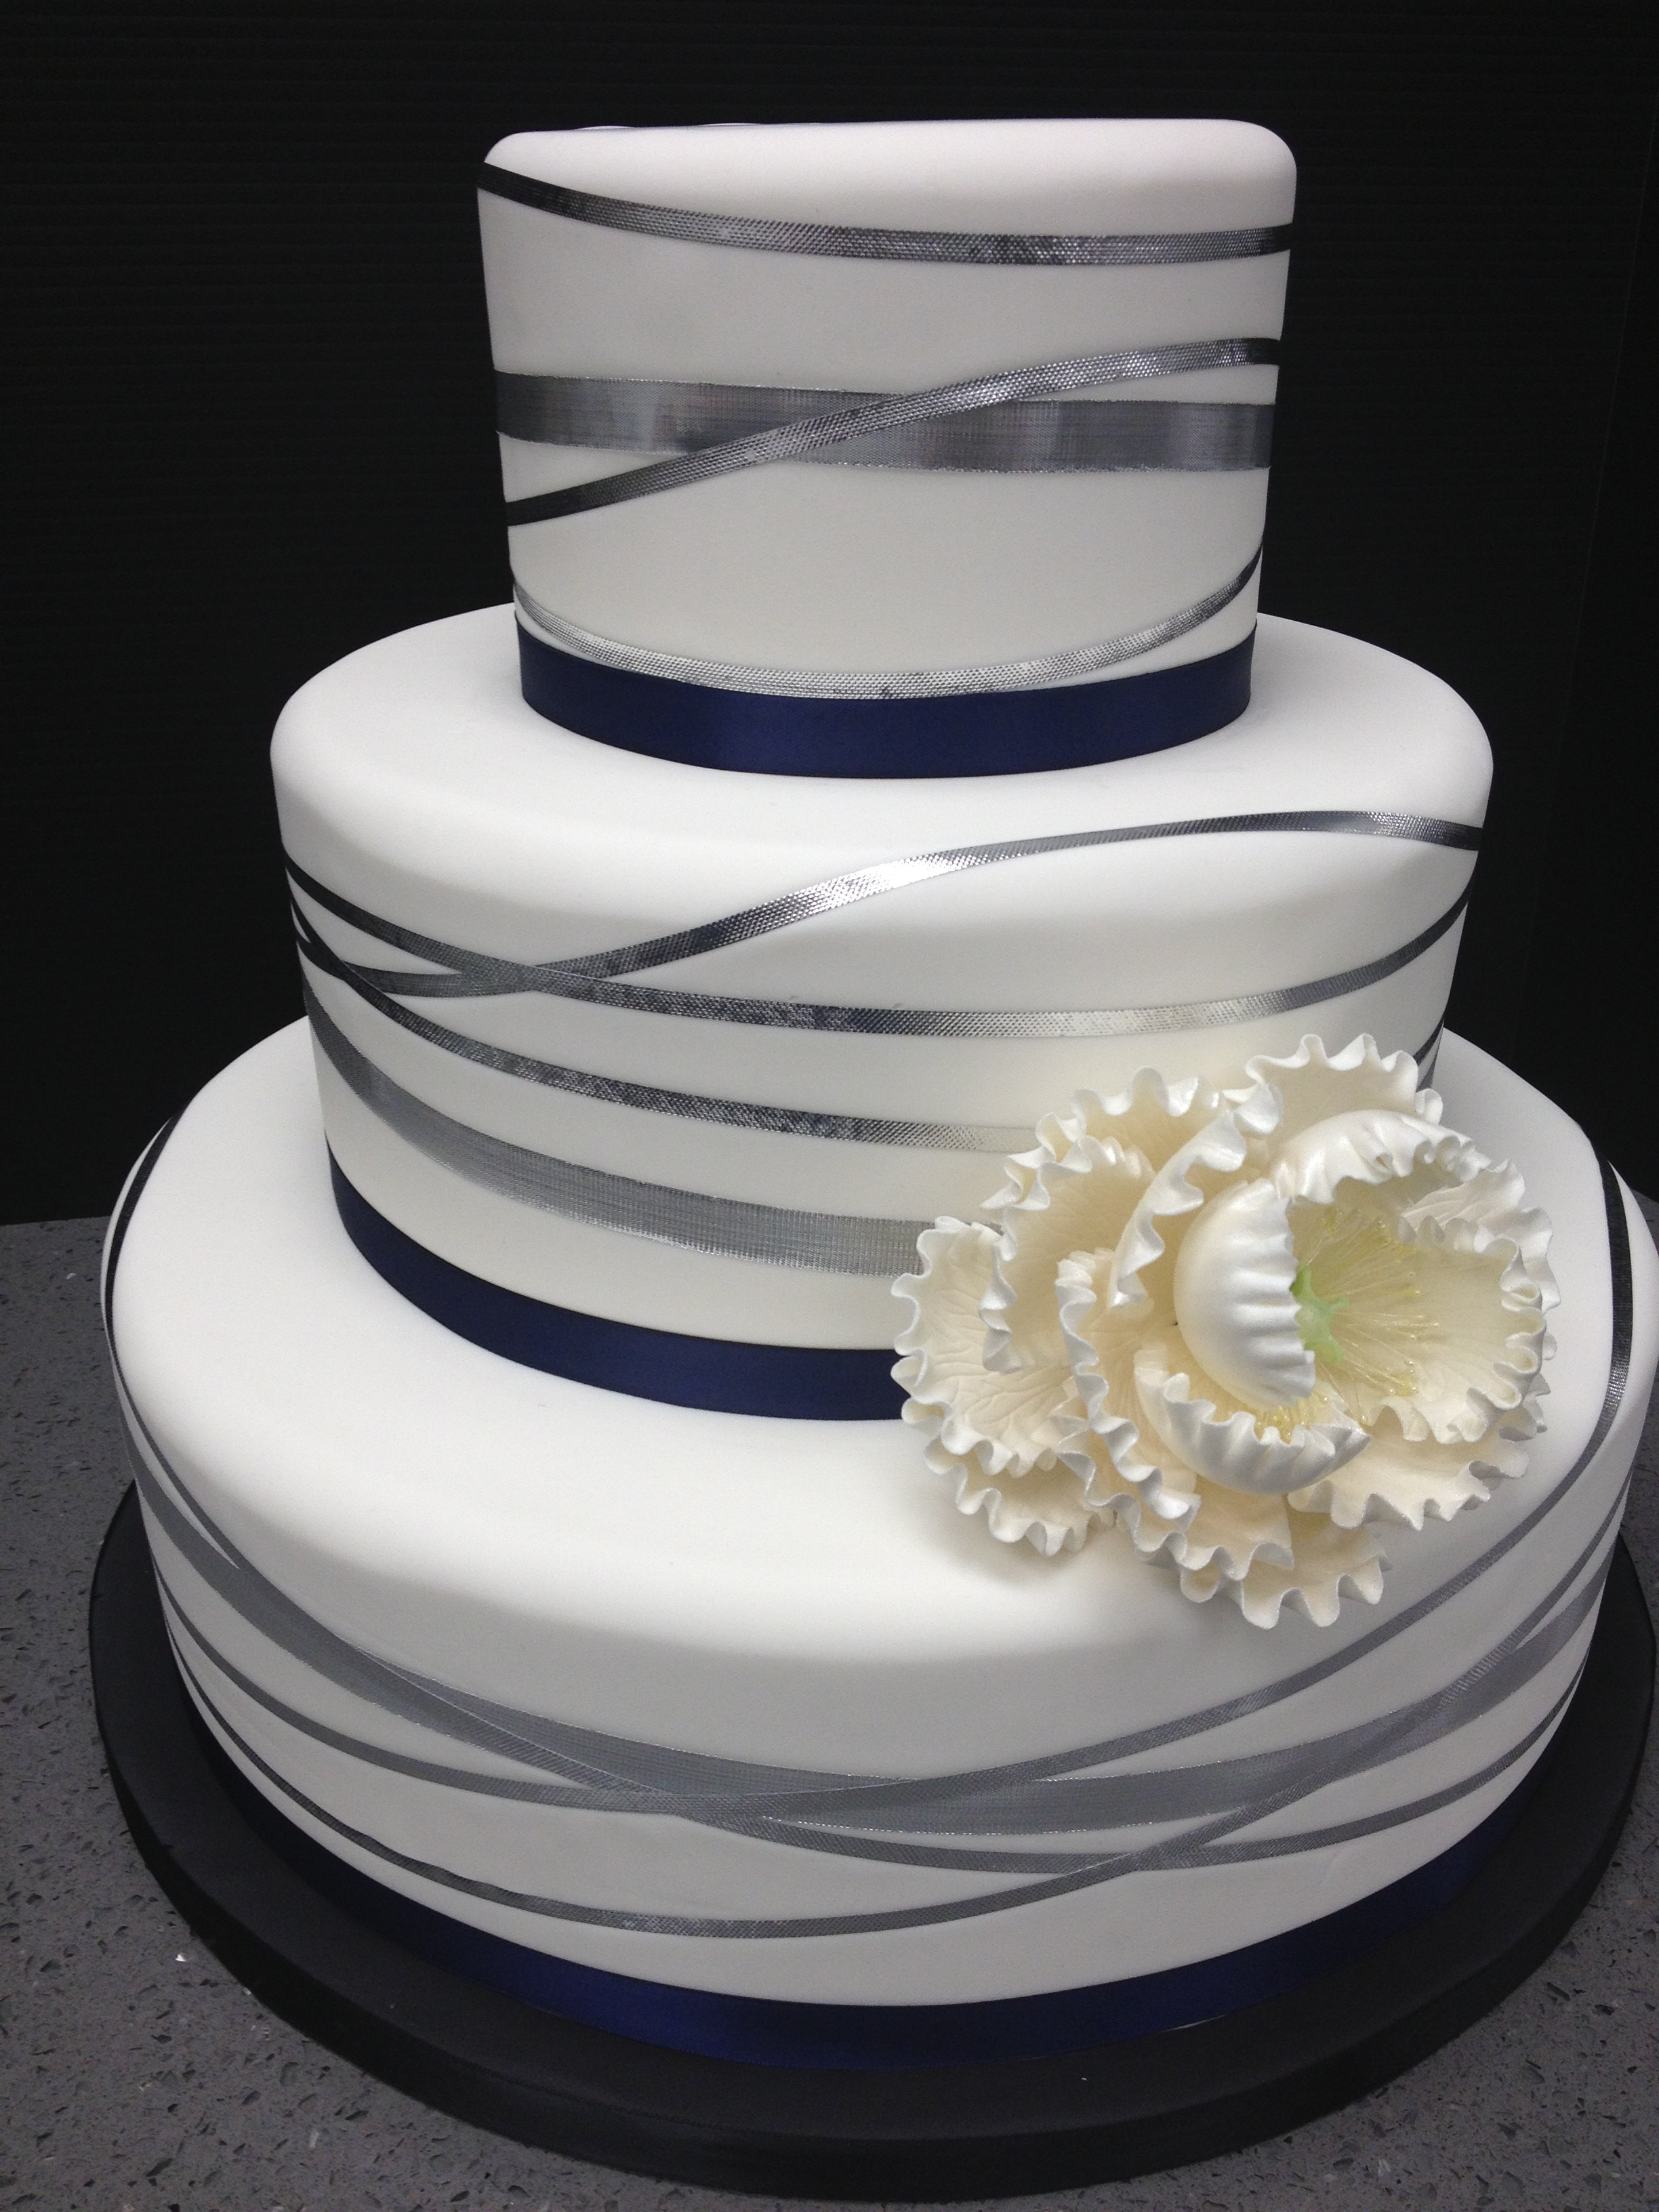 Over the Top Wedding Cake